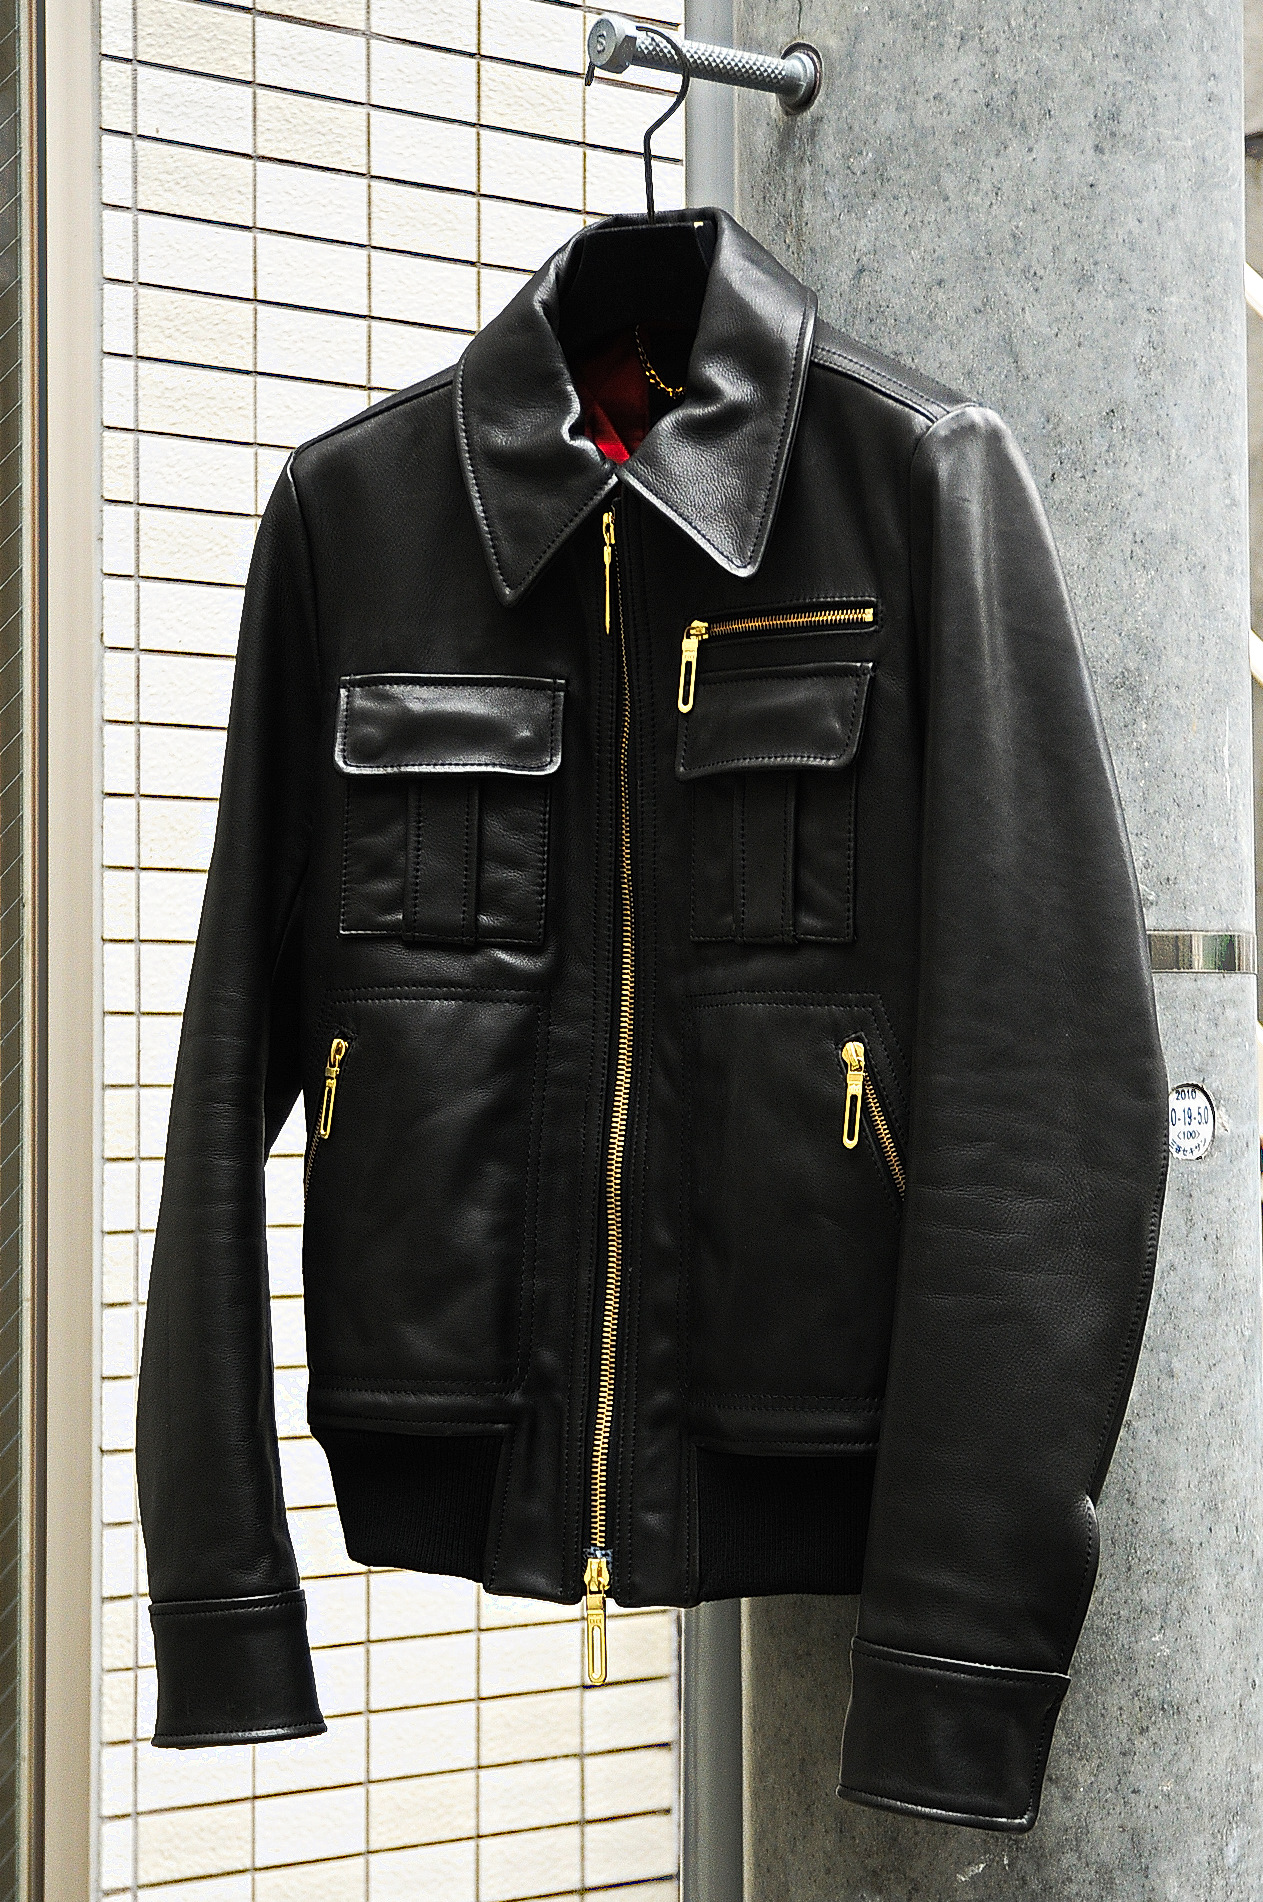 2015Autumn/Winter “A-2 LEATHER JACKET” | GalaabenD